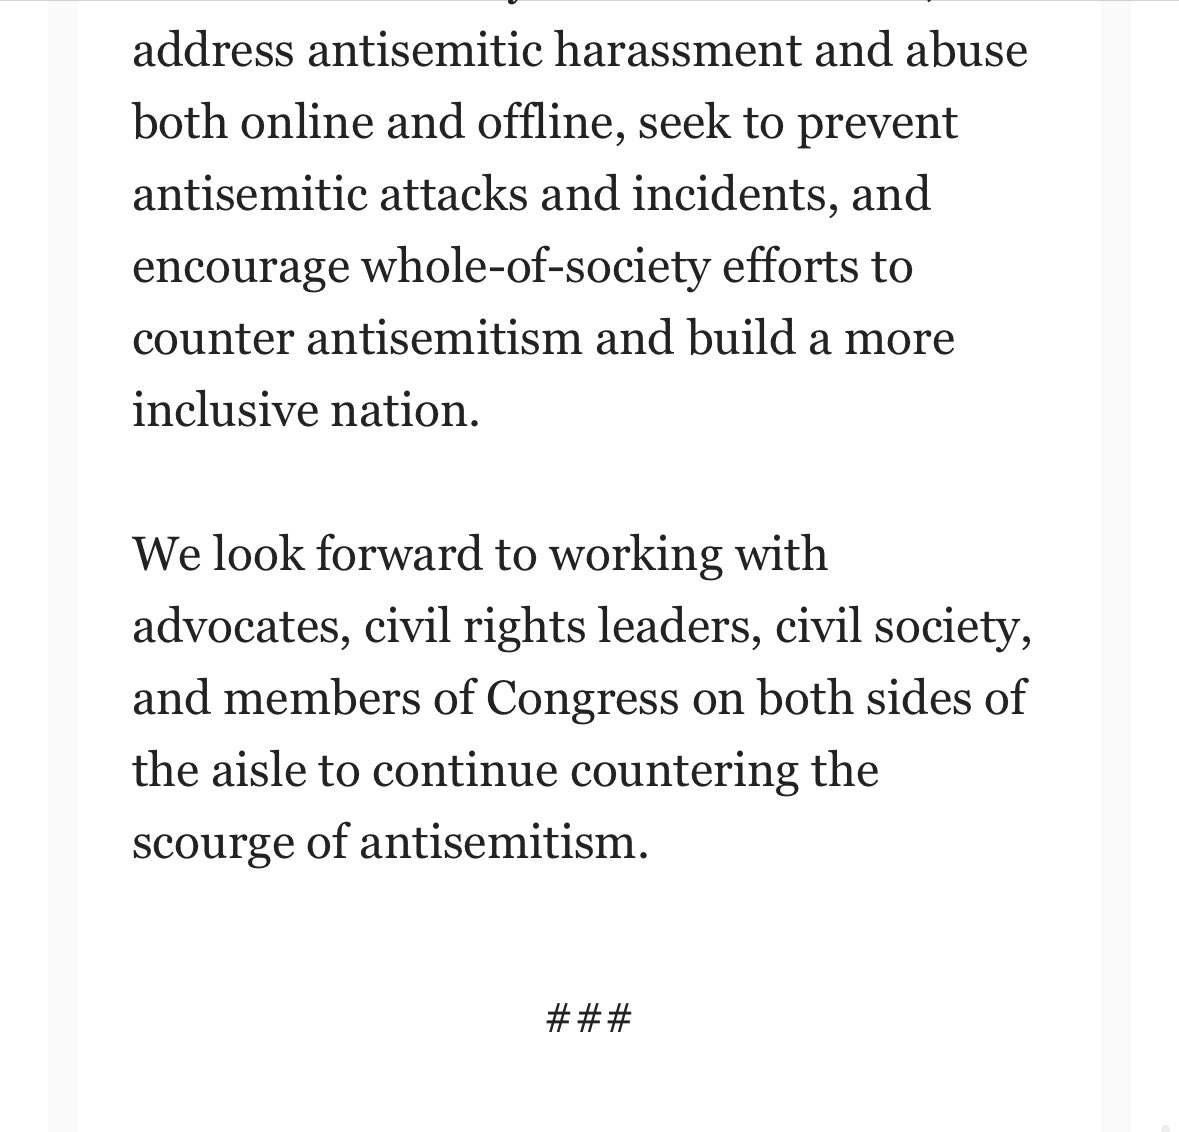 I was honored to attend last week’s @WhiteHouse roundtable on antisemitism — and I’m heartened that the administration is now launching an inter-agency group to combat antisemitism and other forms of hate. Full @PressSec statement —>